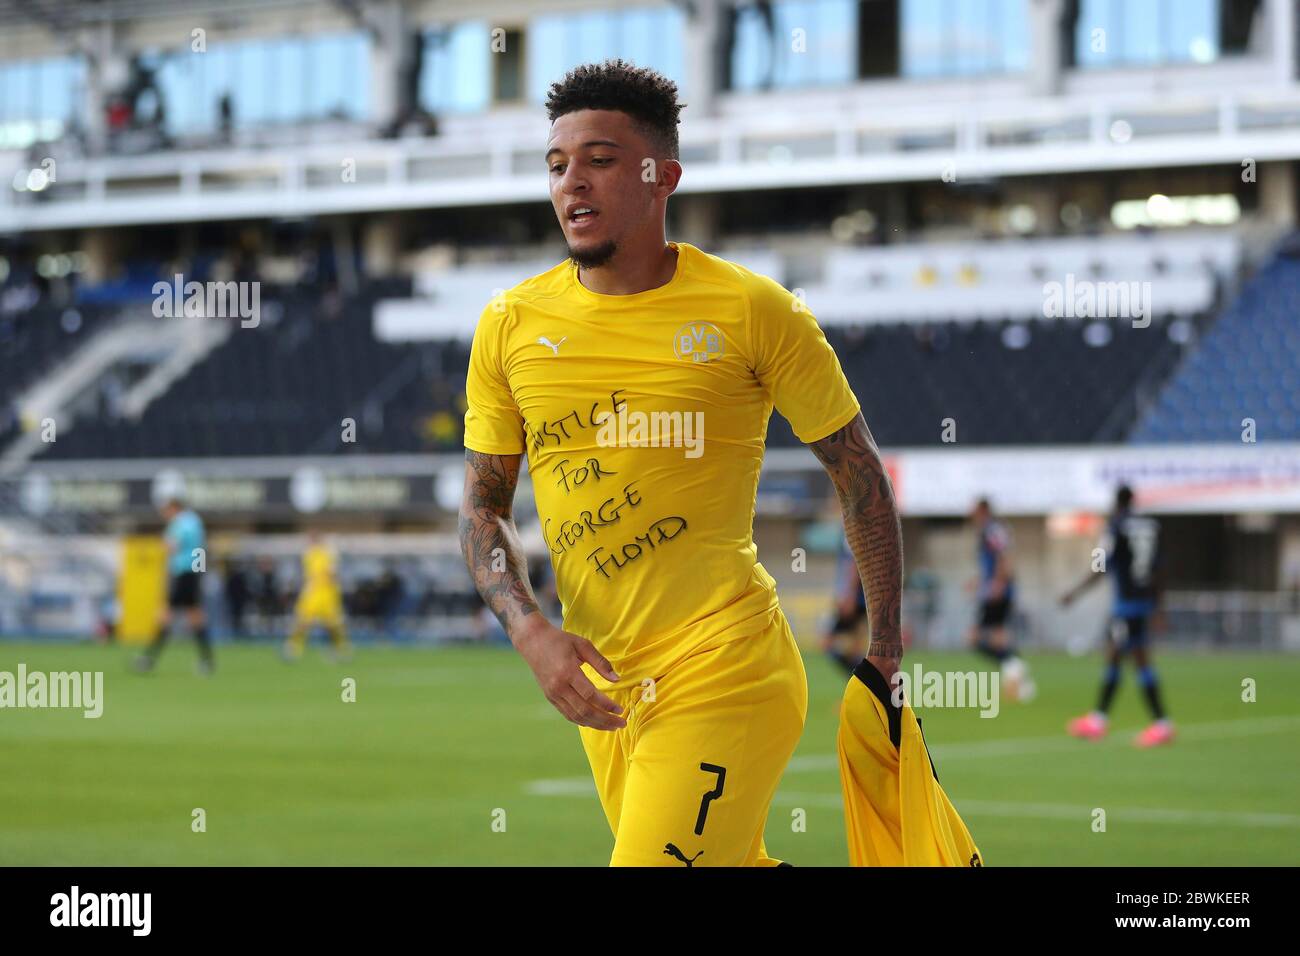 Jadon Sancho of Borussia Dortmund celebrates scoring his teams second goal of the game with a 'Justice for George Floyd' shirt during the German Bundesliga soccer match between SC Paderborn 07 and Borussia Dortmund at Benteler Arena in Paderborn, Germany Stock Photo